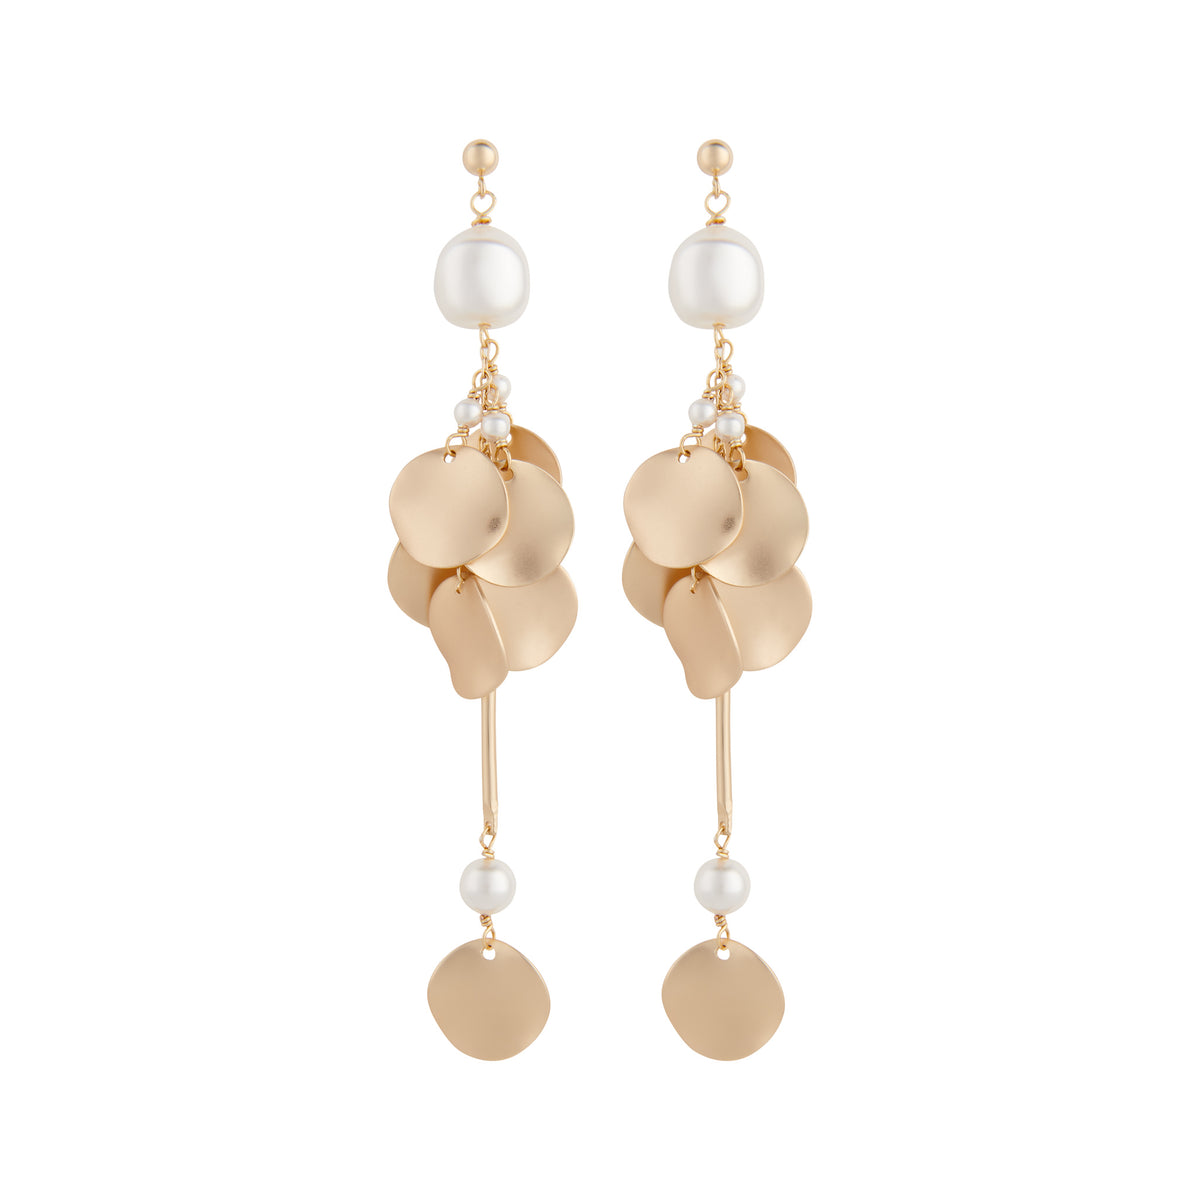 Matte gold ripple disc statement earrings with white pearls by vivien walsh